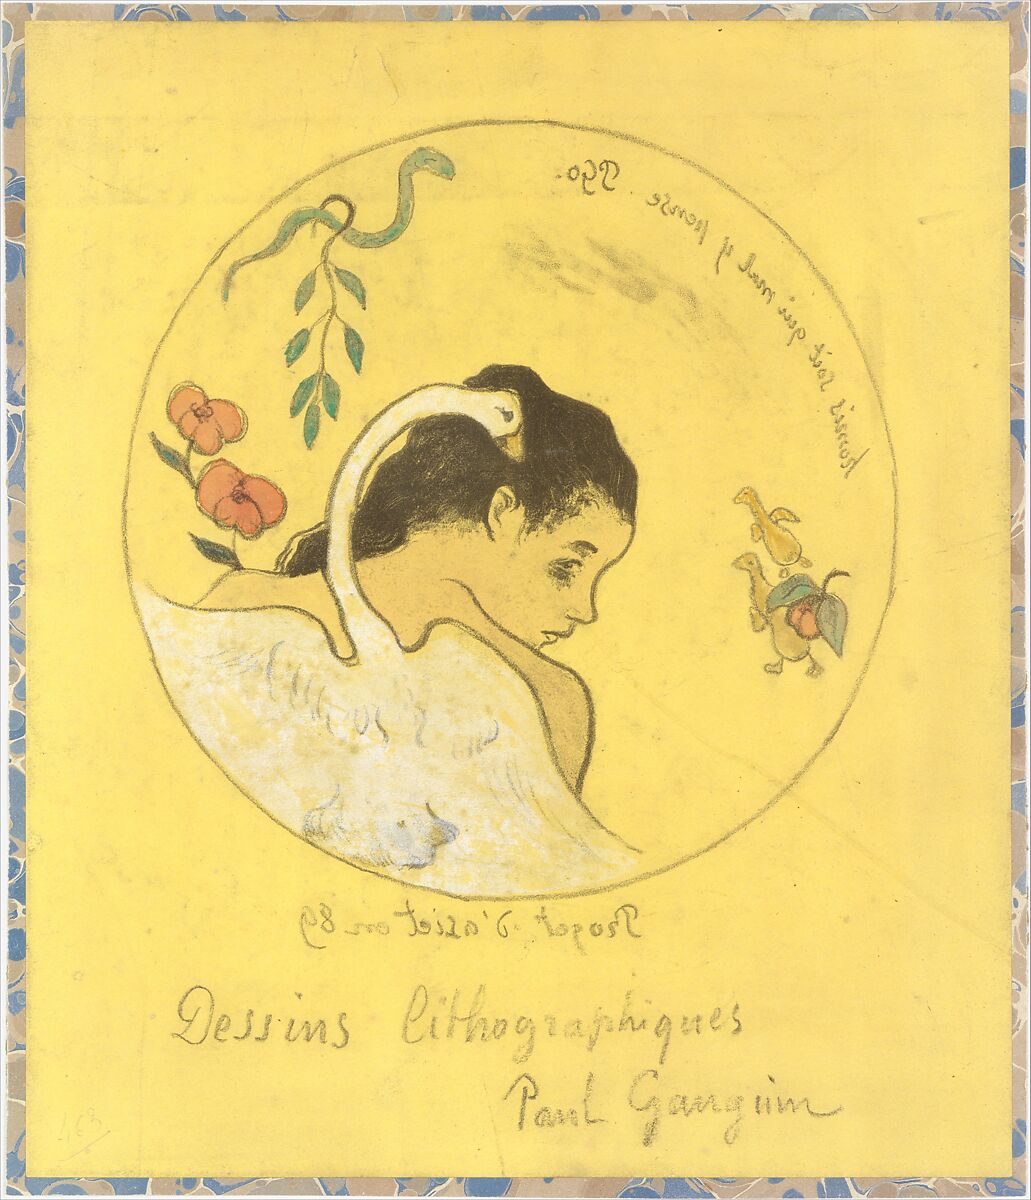 ("Leda") Design for a Plate: Shame on Those Who Evil Think (Honi Soit Qui Mal y Pense) ; cover illustration for the "Volpini Suite" entitled Lithographic Drawings (Dessins lithographiques), Paul Gauguin (French, Paris 1848–1903 Atuona, Hiva Oa, Marquesas Islands), Zincograph, colored by hand with watercolor and gouache on chrome yellow wove paper; mounted on marbled paper applied to millboard (cover of print portfolio, trimmed) 